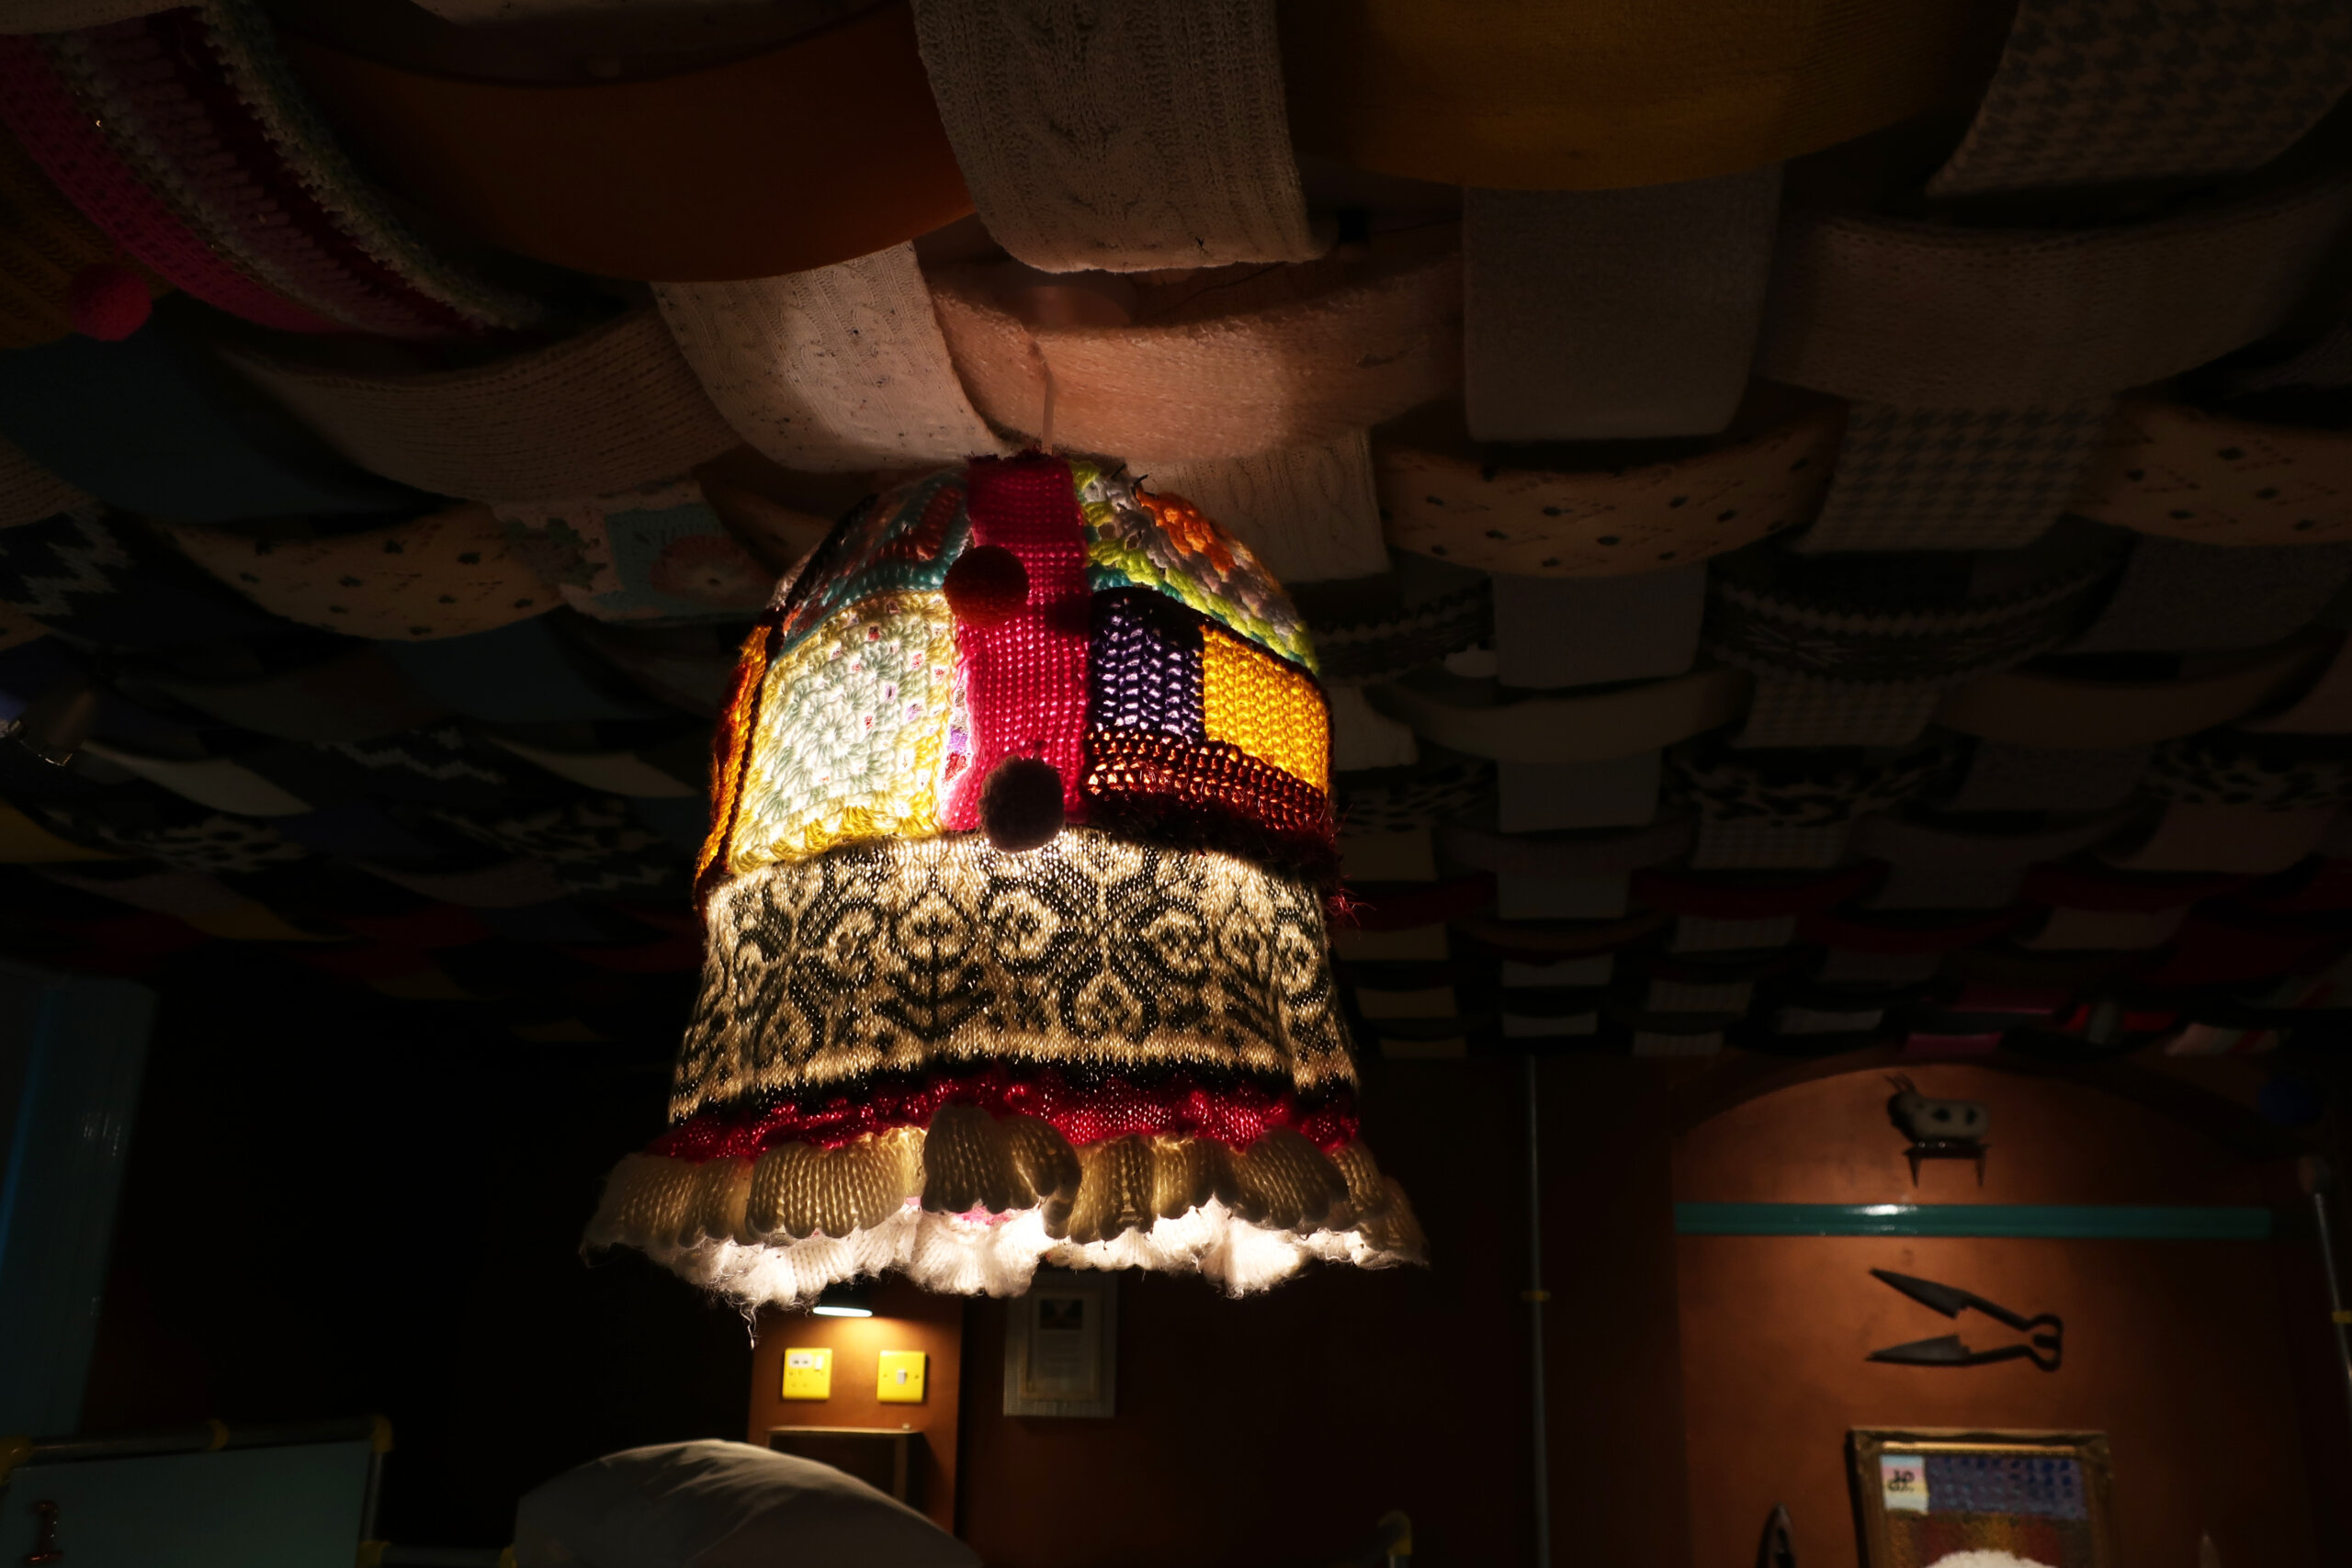 A colourful lampshade made up of patchwork woolen pieces.